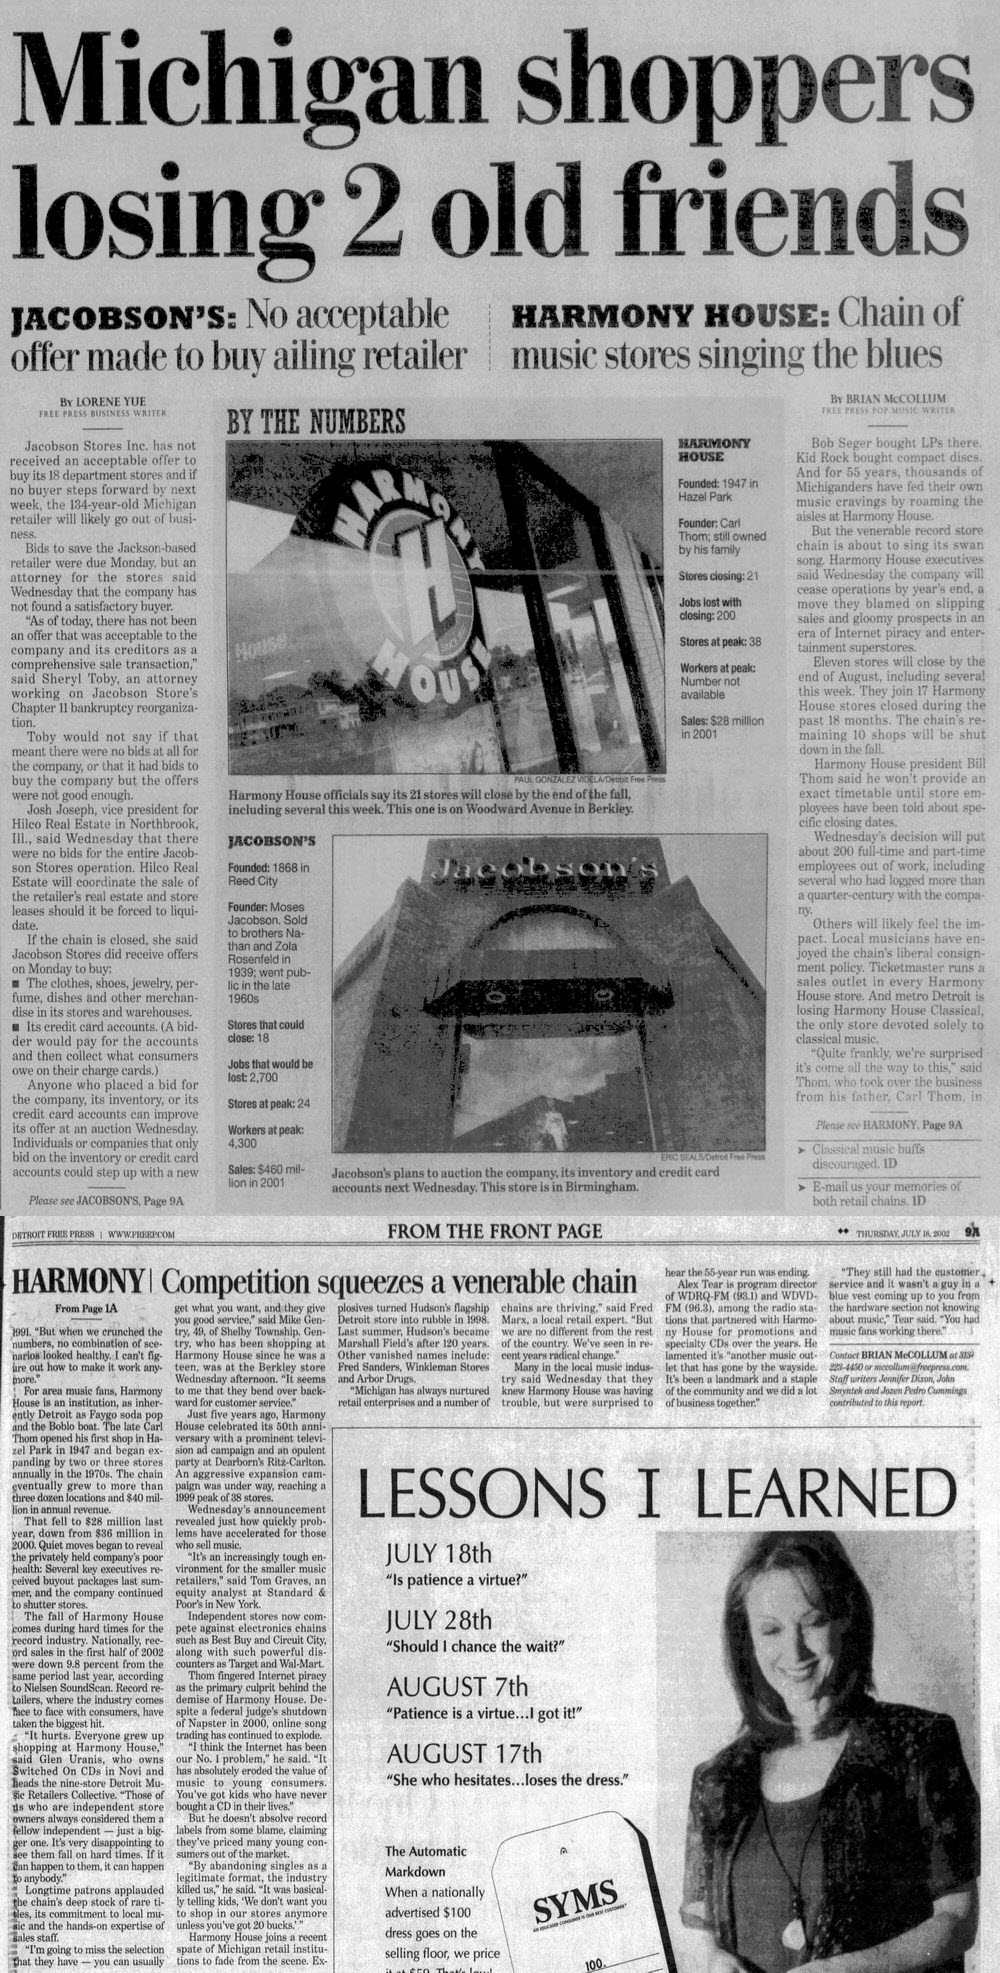 Harmony House Records and Tapes - Jul 18 2002 Article On Closing